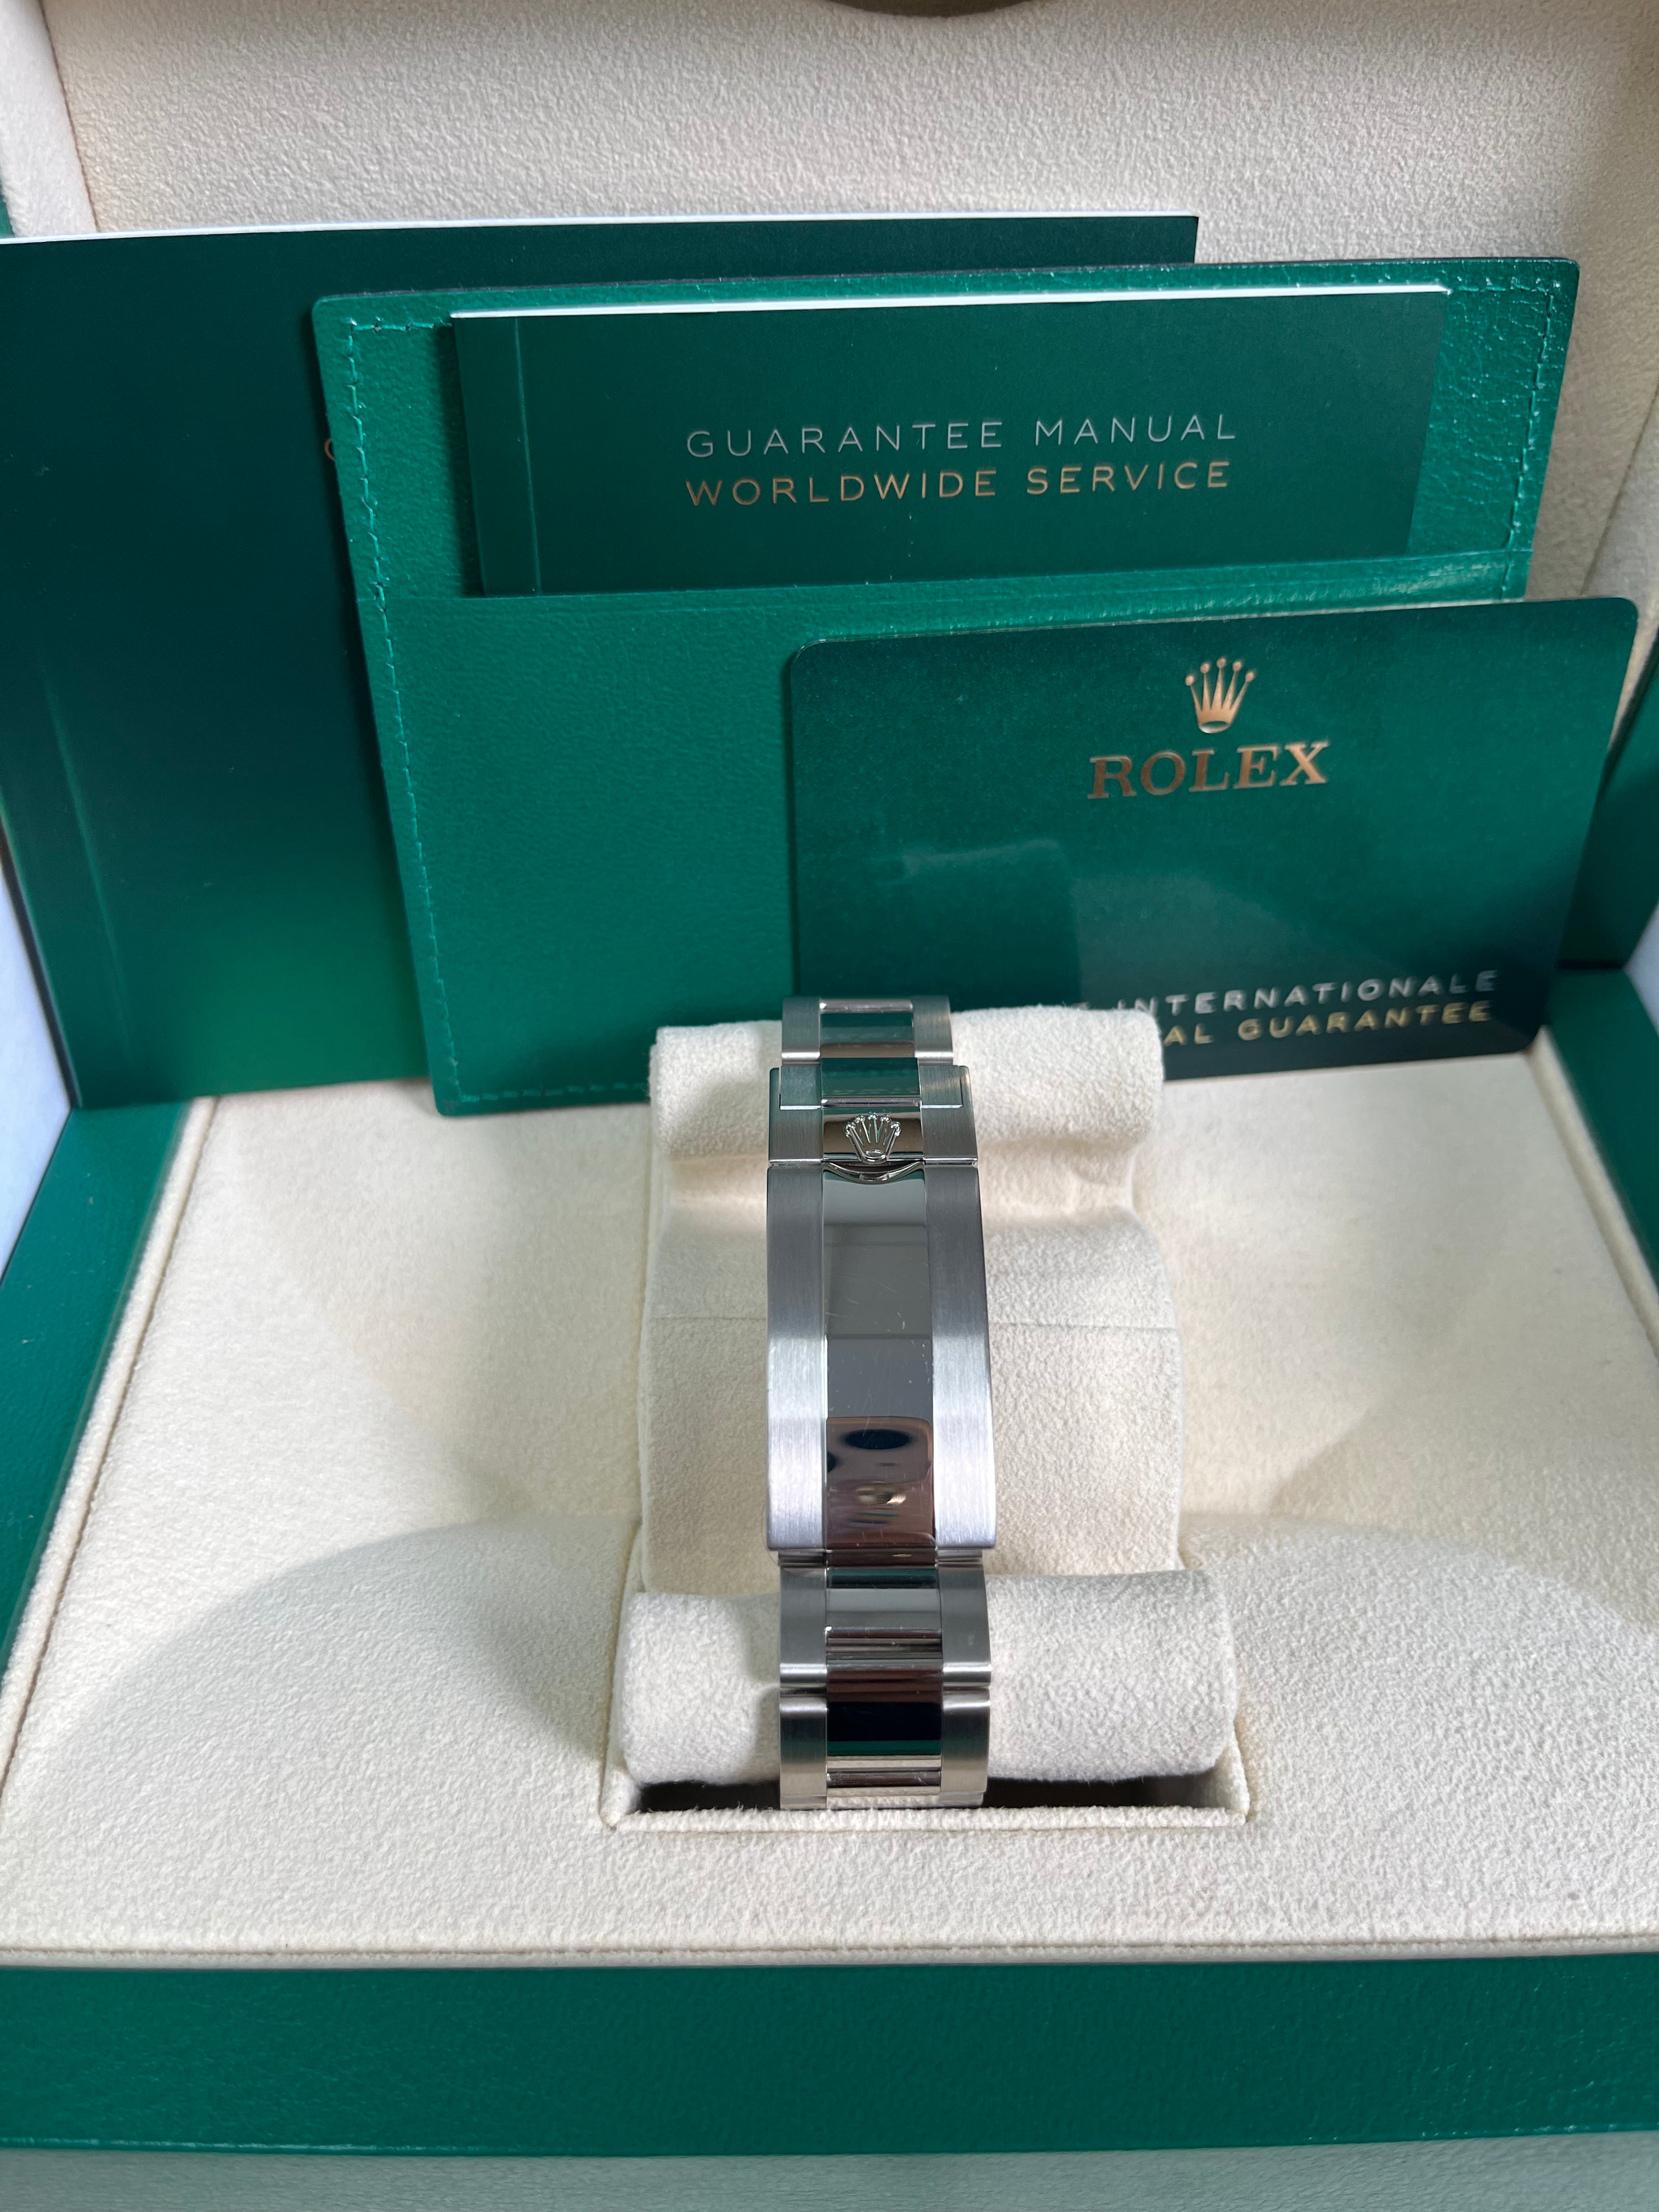 Rolex White Gold Submariner Date Watch - The Blueberry - Blue Bezel - Black Dial (Ref # 126619LB)